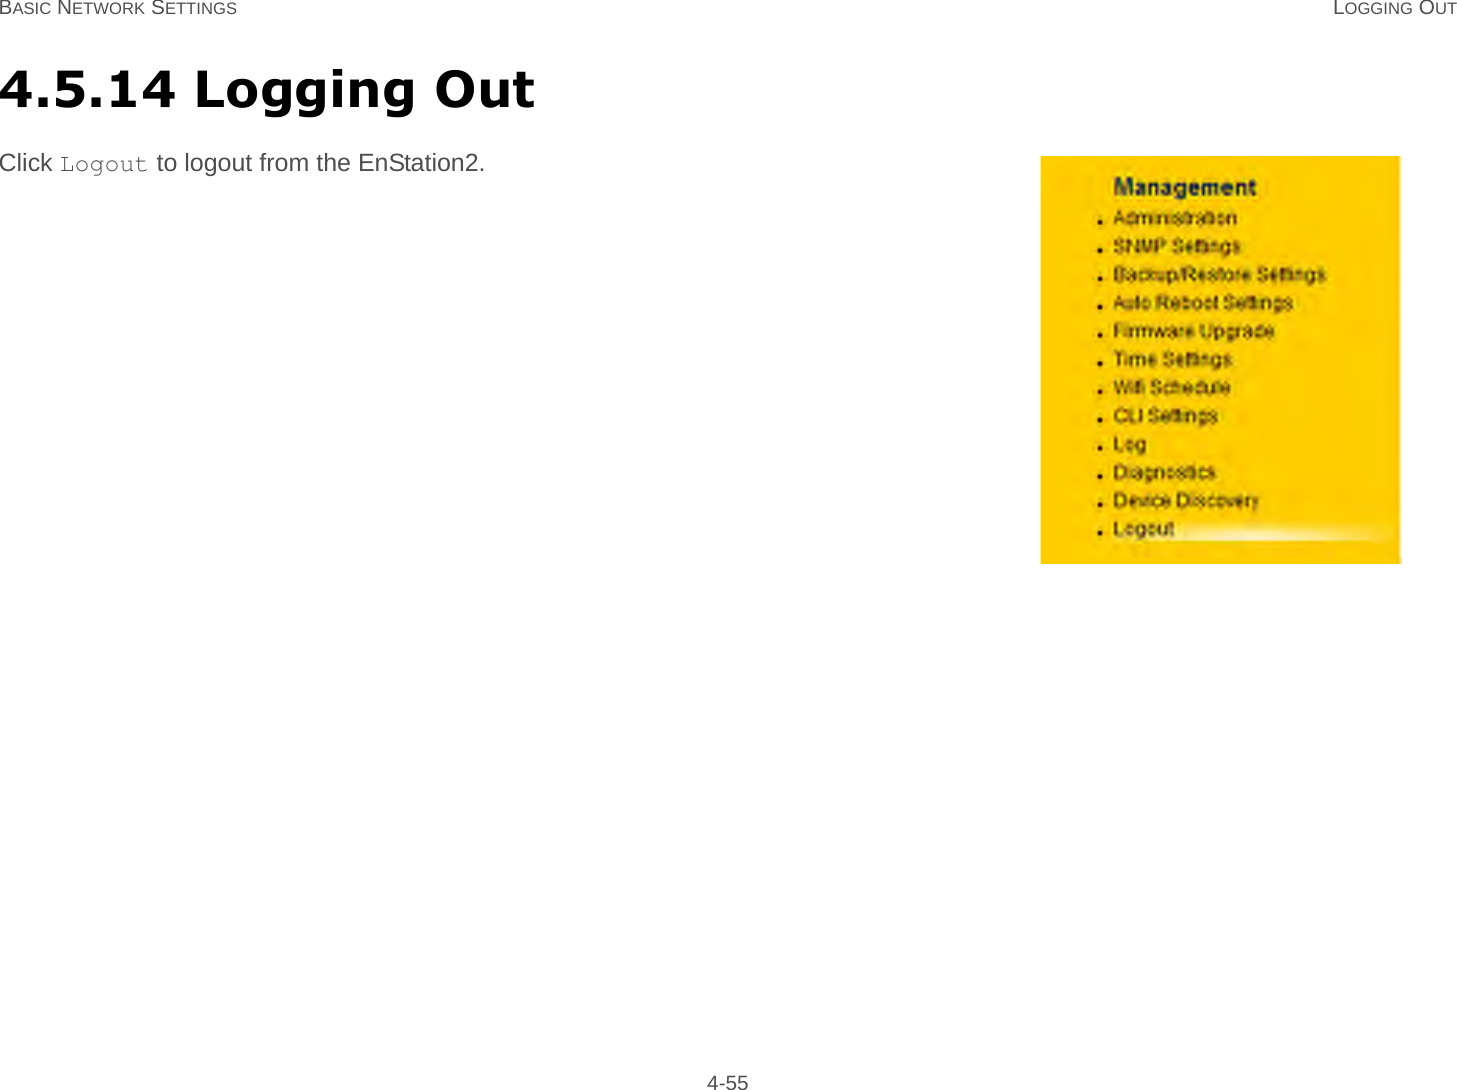 BASIC NETWORK SETTINGS LOGGING OUT 4-554.5.14 Logging OutClick Logout to logout from the EnStation2.